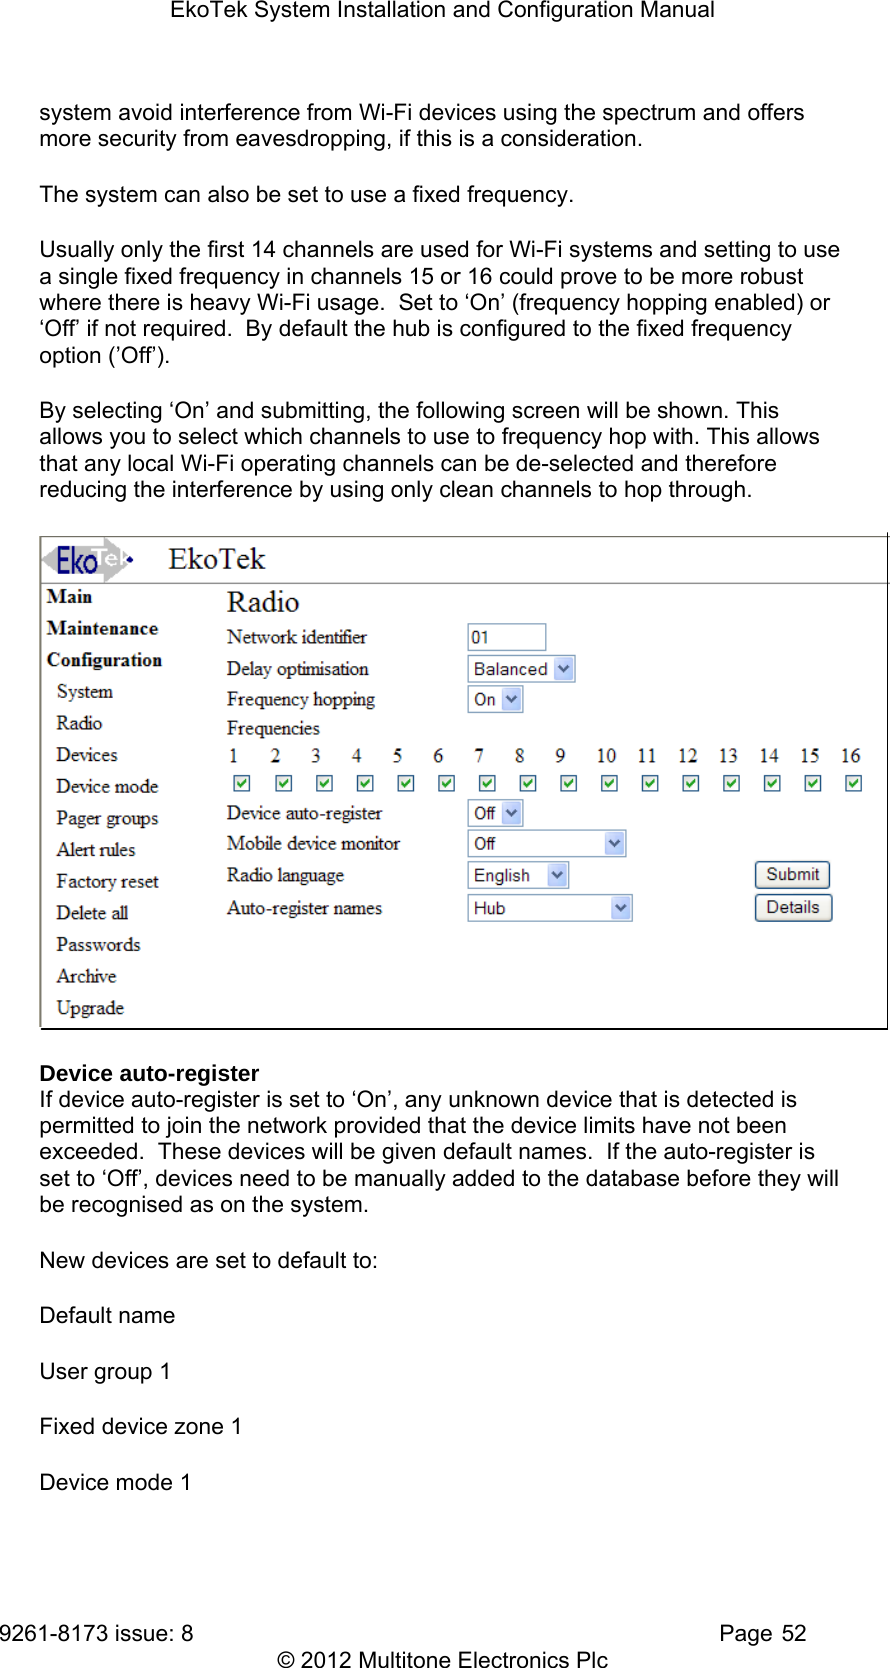 EkoTek System Installation and Configuration Manual 9261-8173 issue: 8   Page 52 © 2012 Multitone Electronics Plc system avoid interference from Wi-Fi devices using the spectrum and offers more security from eavesdropping, if this is a consideration. The system can also be set to use a fixed frequency. Usually only the first 14 channels are used for Wi-Fi systems and setting to use a single fixed frequency in channels 15 or 16 could prove to be more robust where there is heavy Wi-Fi usage.  Set to ‘On’ (frequency hopping enabled) or ‘Off’ if not required.  By default the hub is configured to the fixed frequency option (’Off’).  By selecting ‘On’ and submitting, the following screen will be shown. This allows you to select which channels to use to frequency hop with. This allows that any local Wi-Fi operating channels can be de-selected and therefore reducing the interference by using only clean channels to hop through.  Device auto-register If device auto-register is set to ‘On’, any unknown device that is detected is permitted to join the network provided that the device limits have not been exceeded.  These devices will be given default names.  If the auto-register is set to ‘Off’, devices need to be manually added to the database before they will be recognised as on the system. New devices are set to default to: Default name User group 1 Fixed device zone 1 Device mode 1 